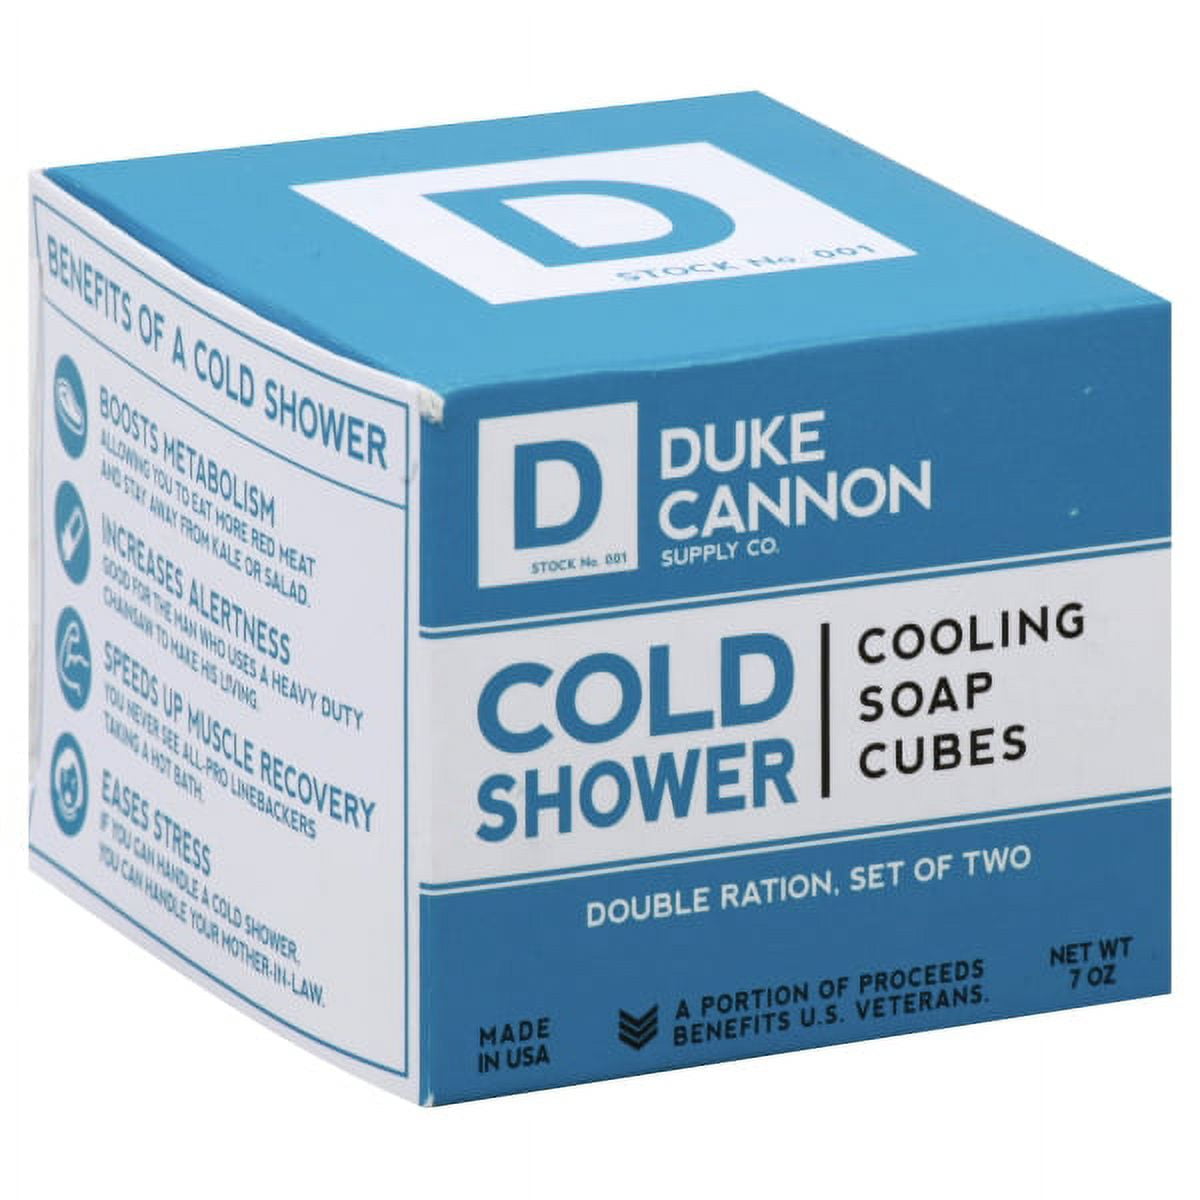 Duke Cannon Cold Shower Cooling Soap Cubes 7 Ounce for sale online